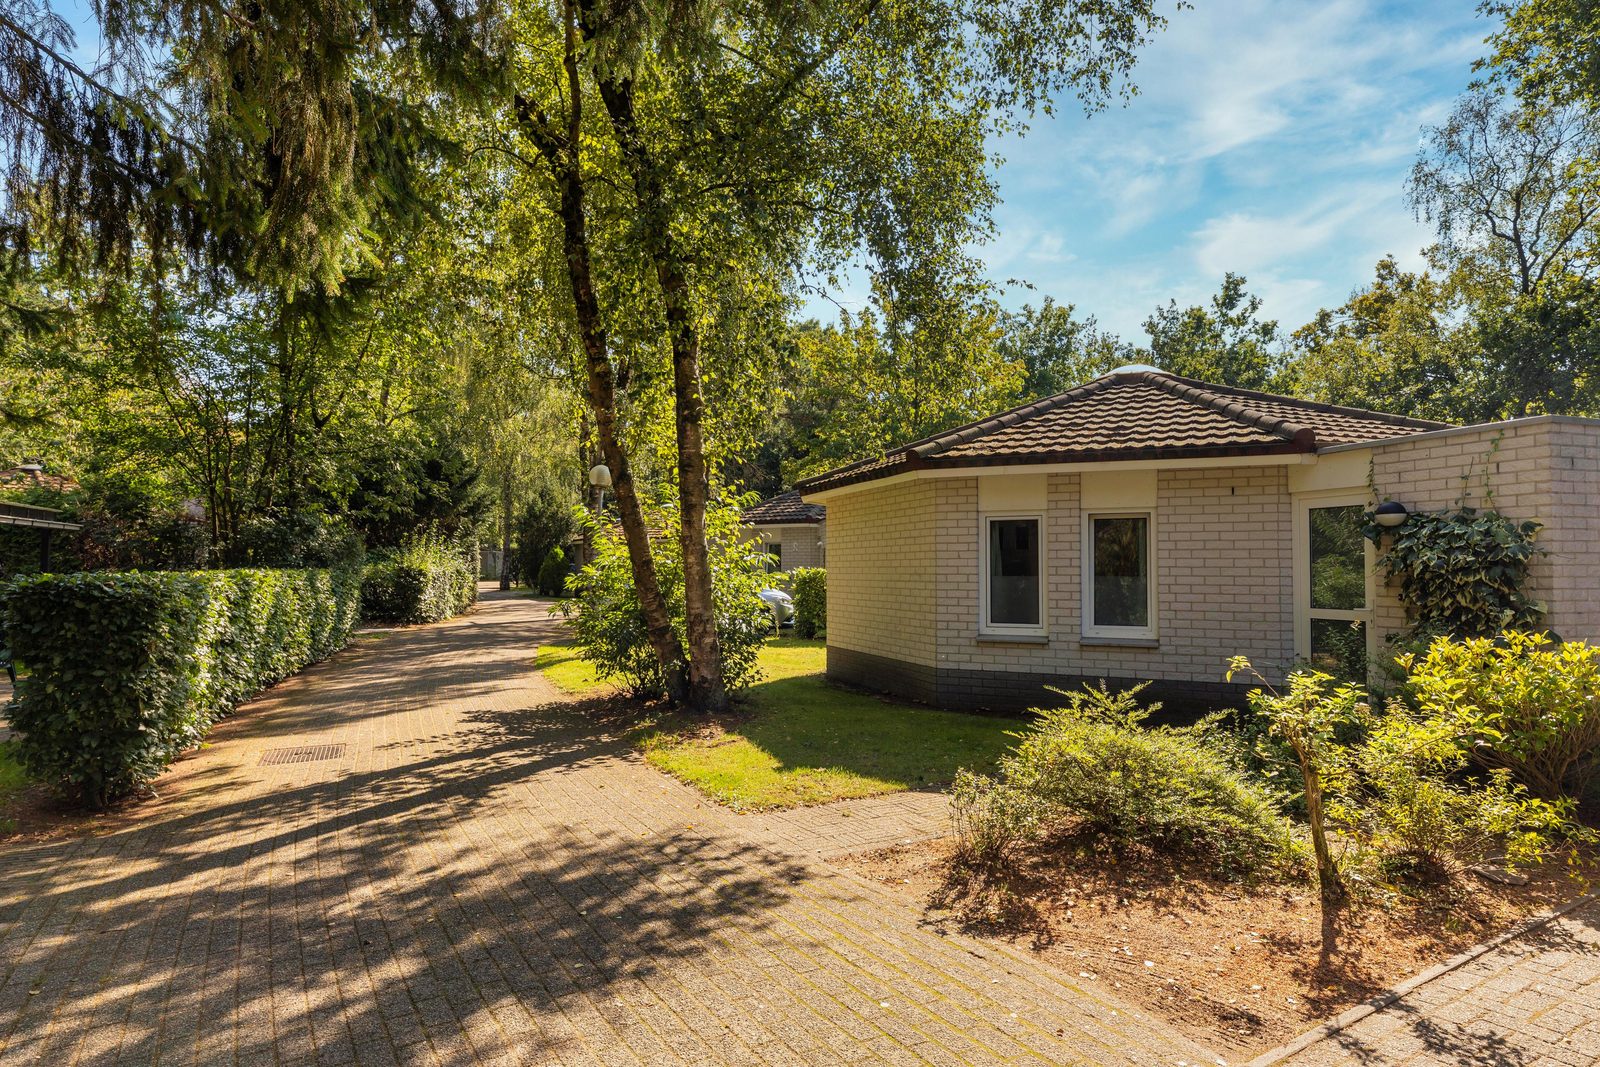 Discover our bungalows